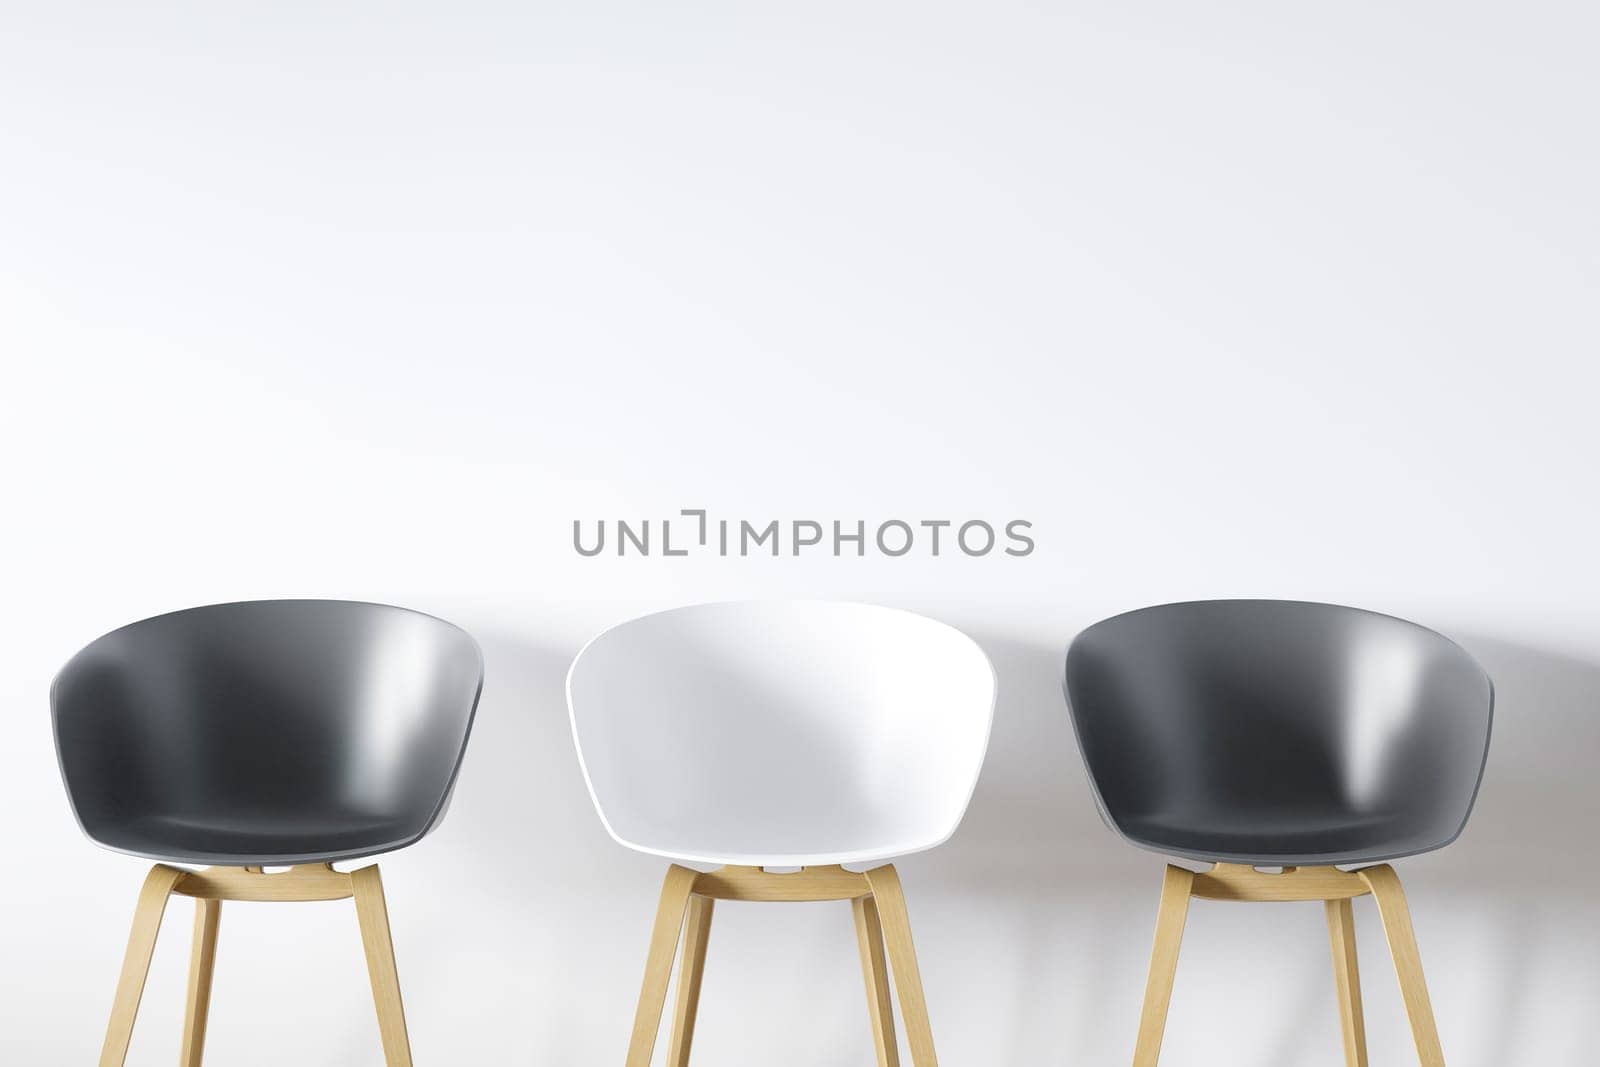 Row of chairs with one odd one out. Job opportunity. Business leadership. recruitment concept. by ijeab